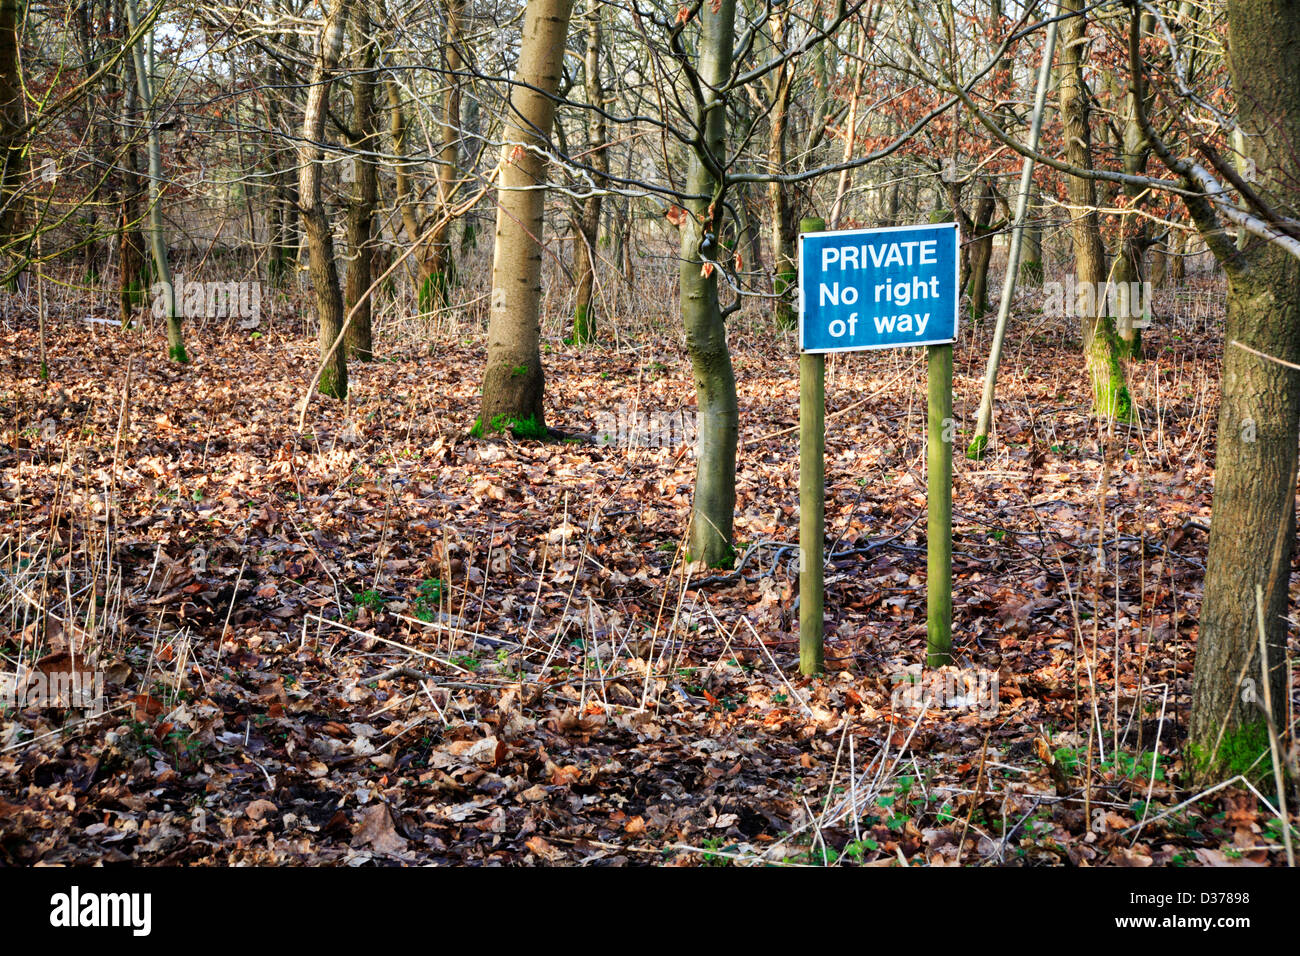 A Private no right of way sign in a woodland in Norfolk, England, United Kingdom. Stock Photo